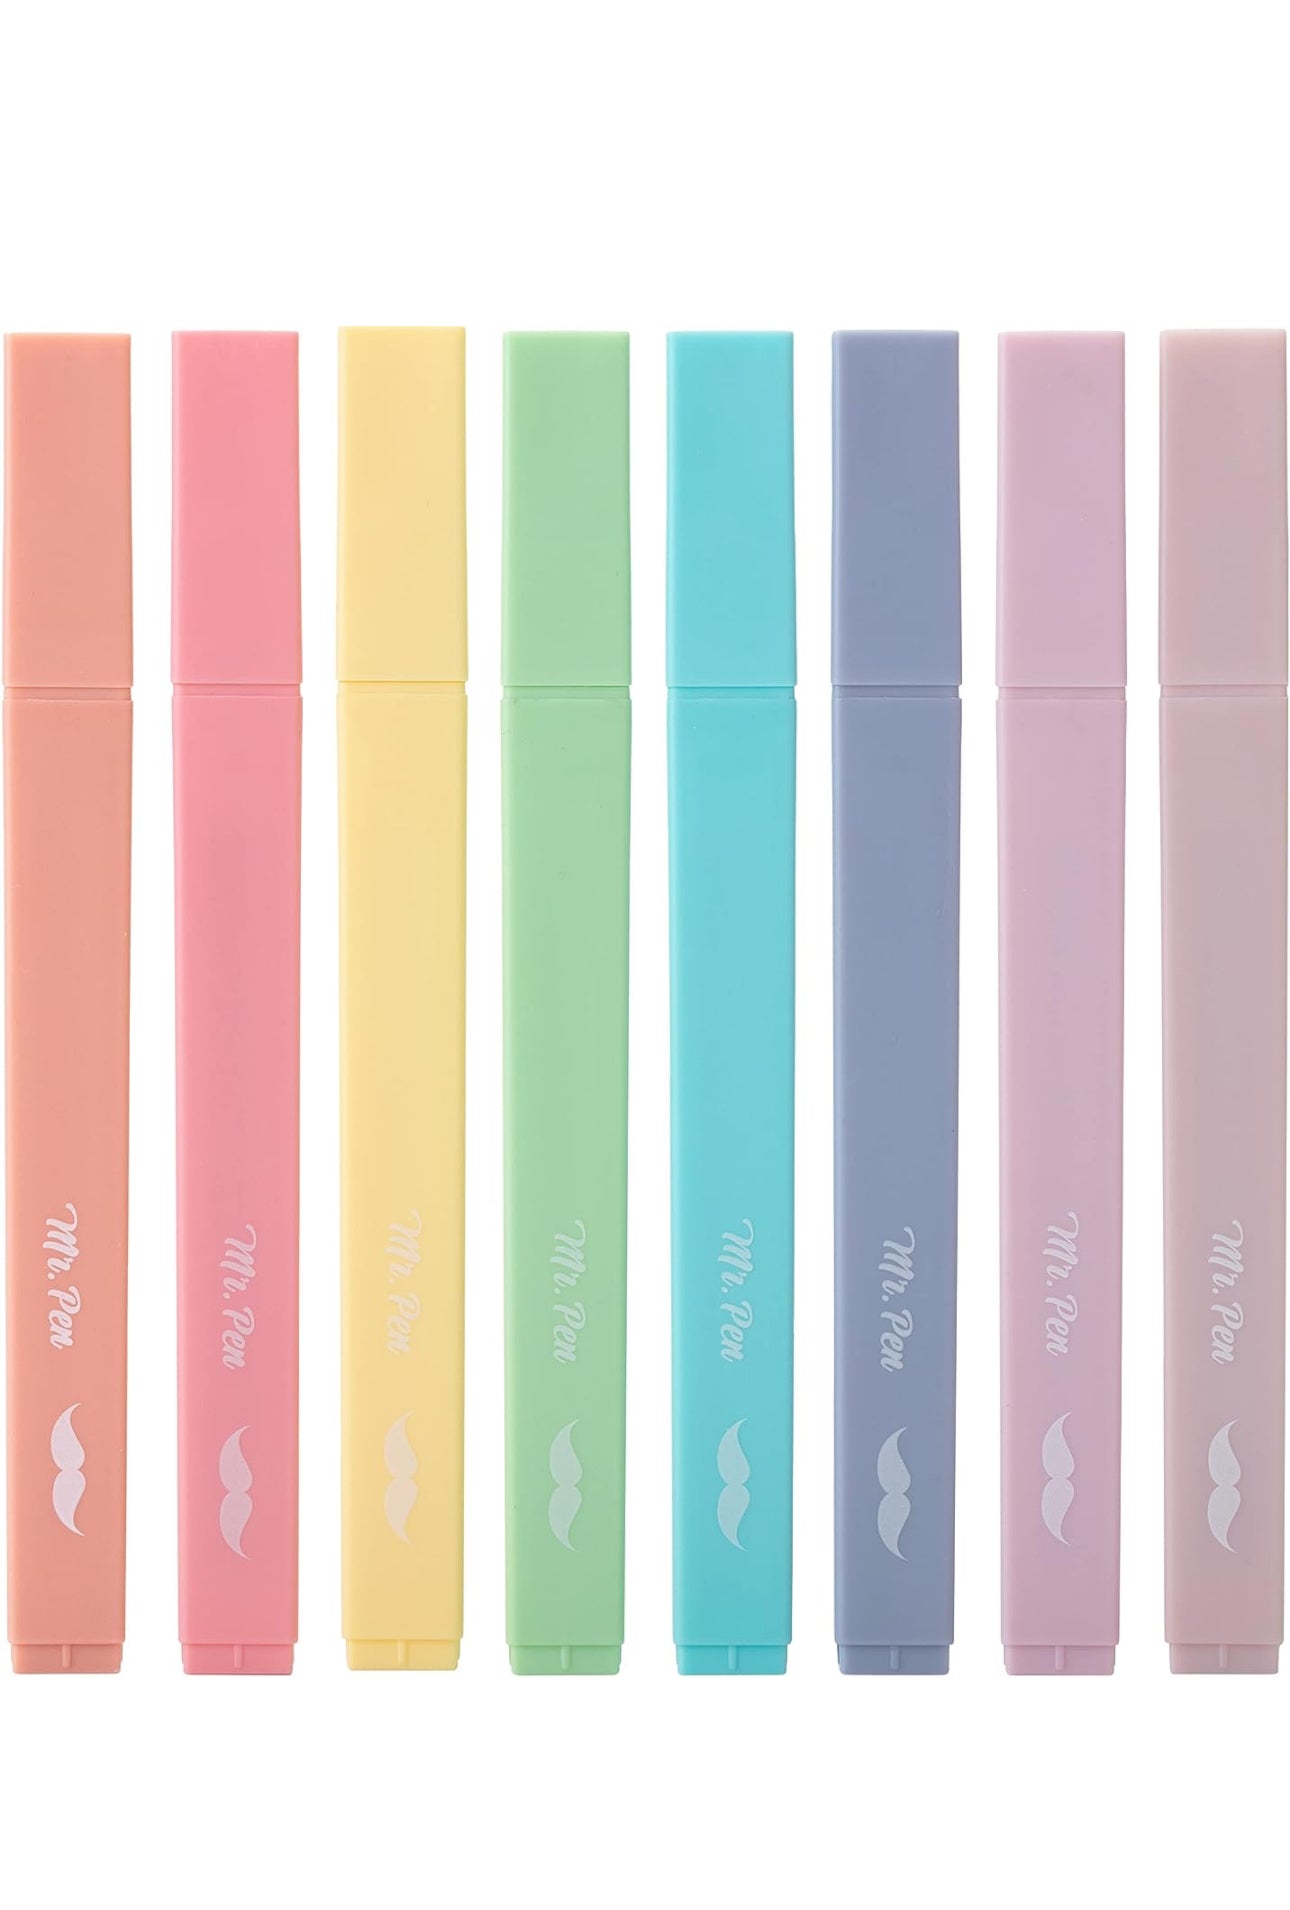 Candy Vibrant Highlighters